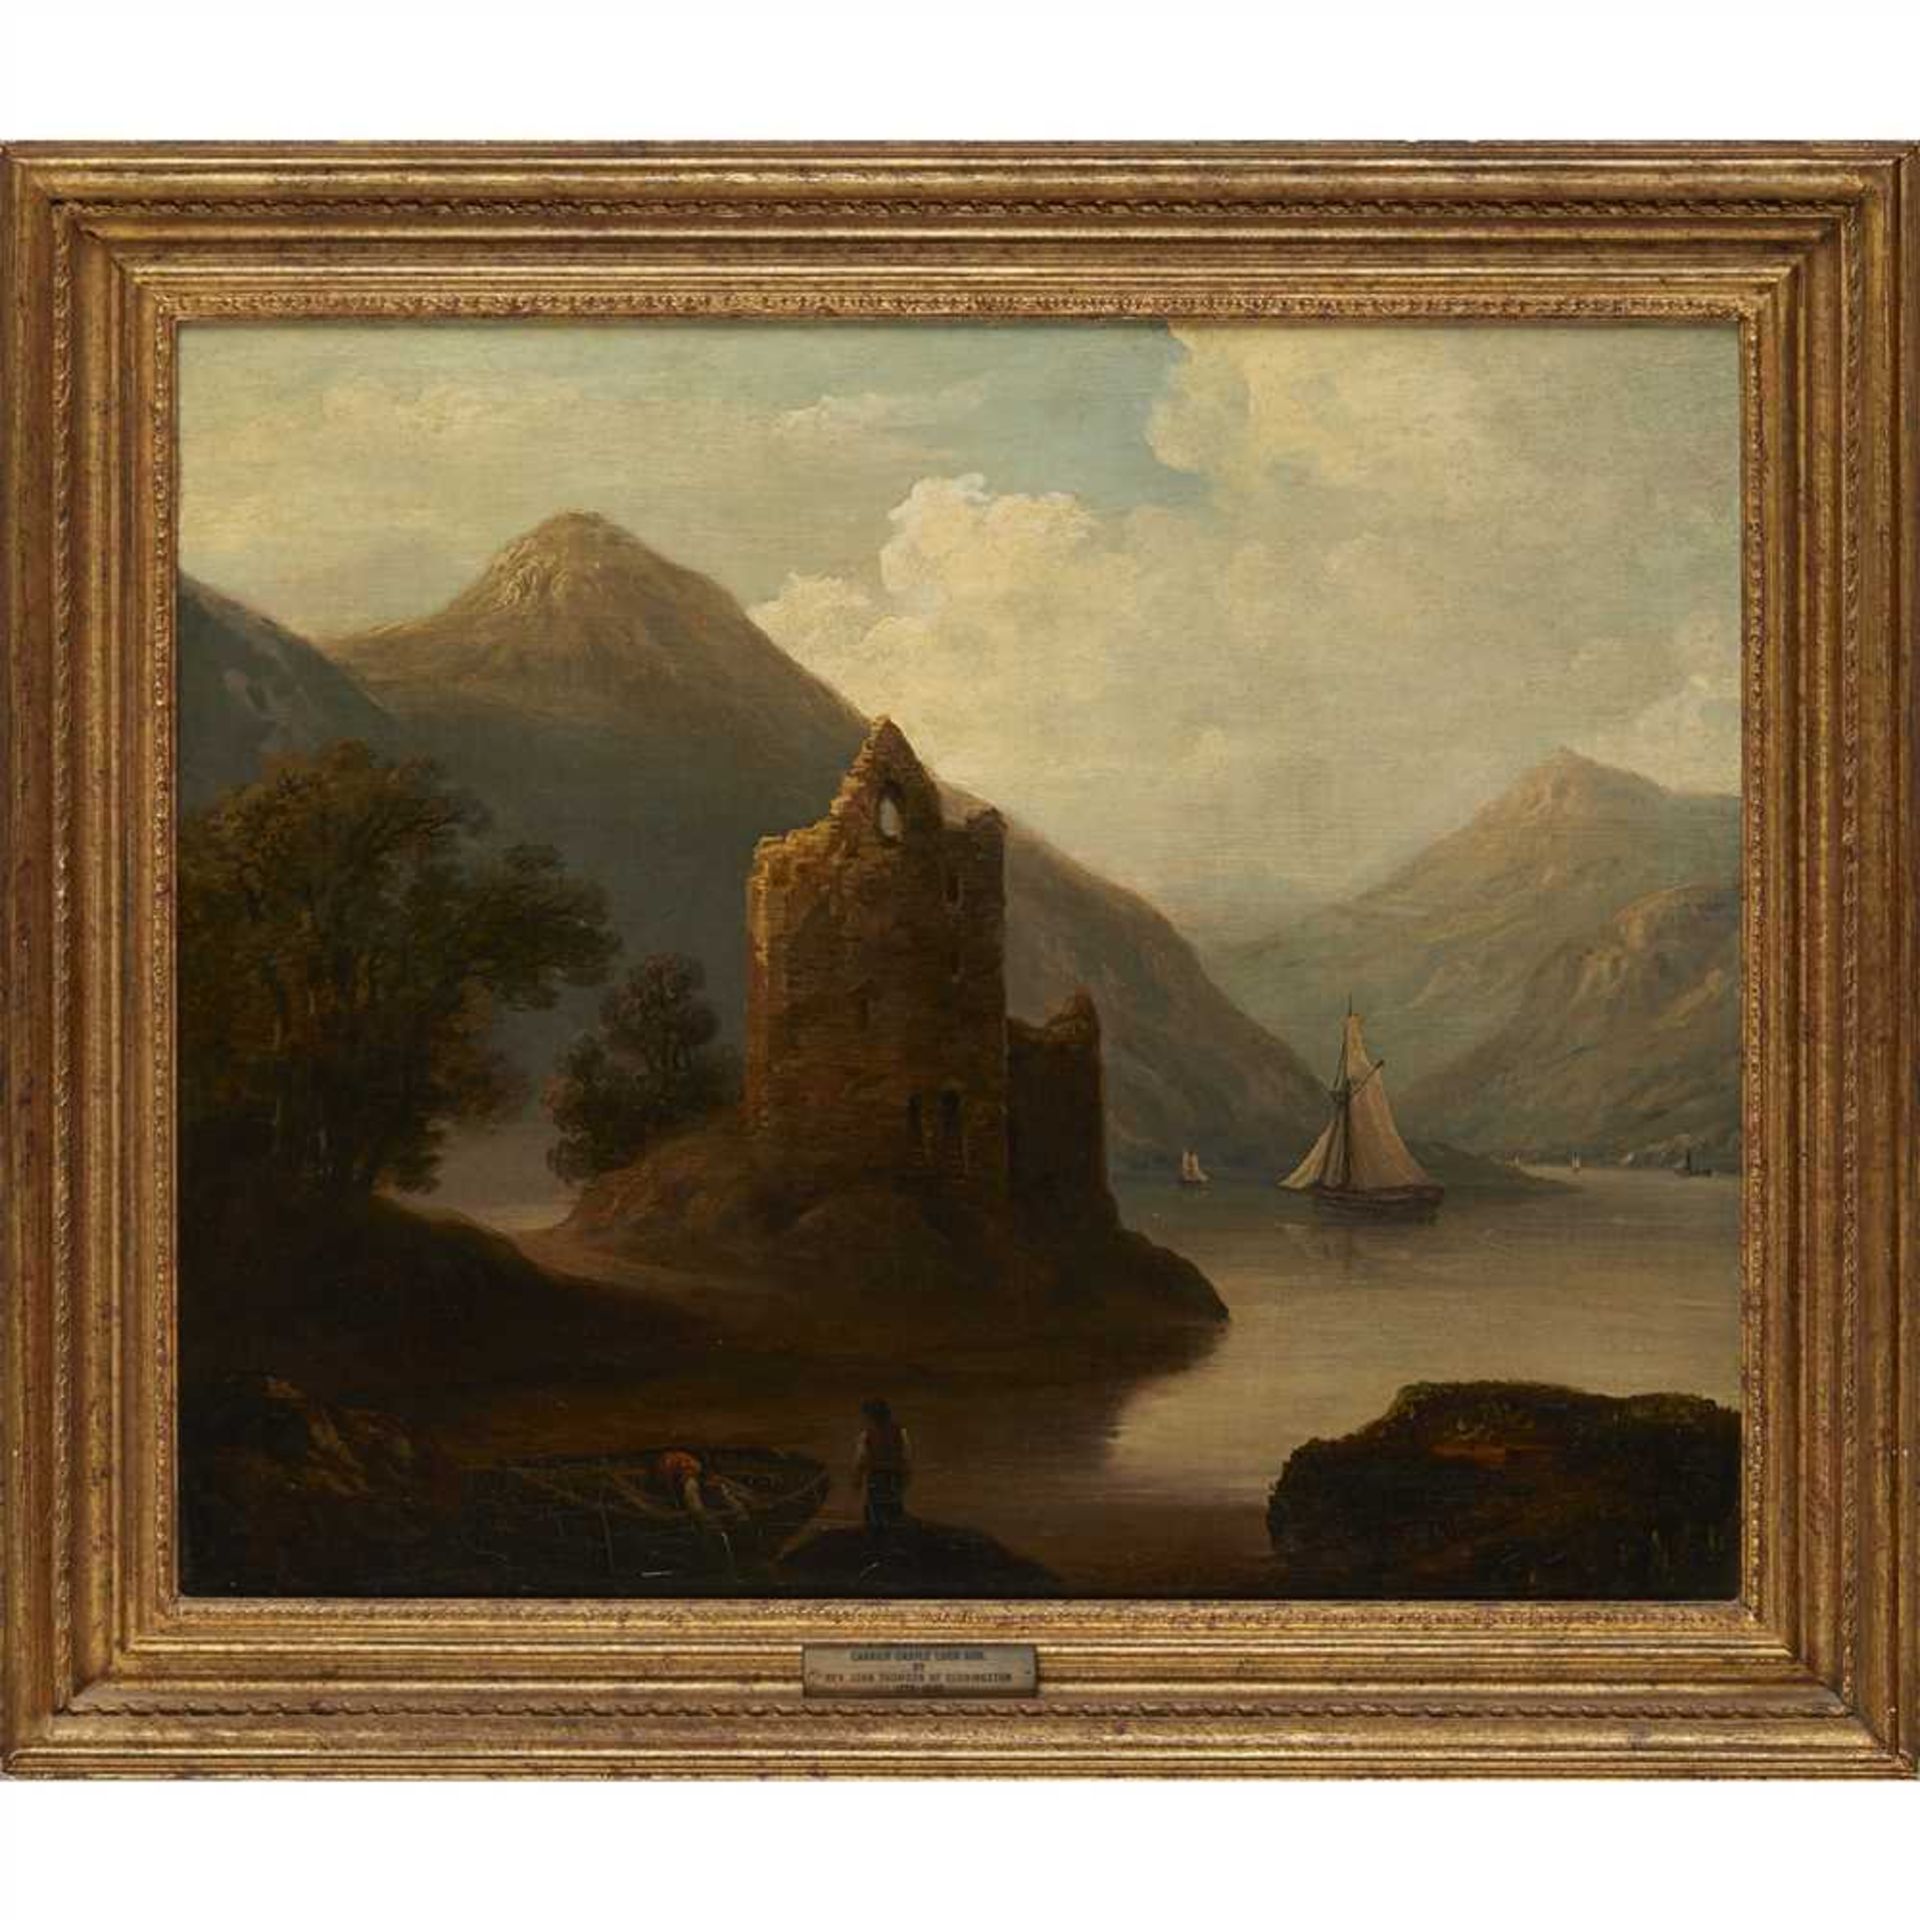 AFTER REV. JOHN THOMSON CARRICK CASTLE- LOCH GOIL Bears signature, oil on canvas (Dimensions: 49cm x - Image 2 of 2